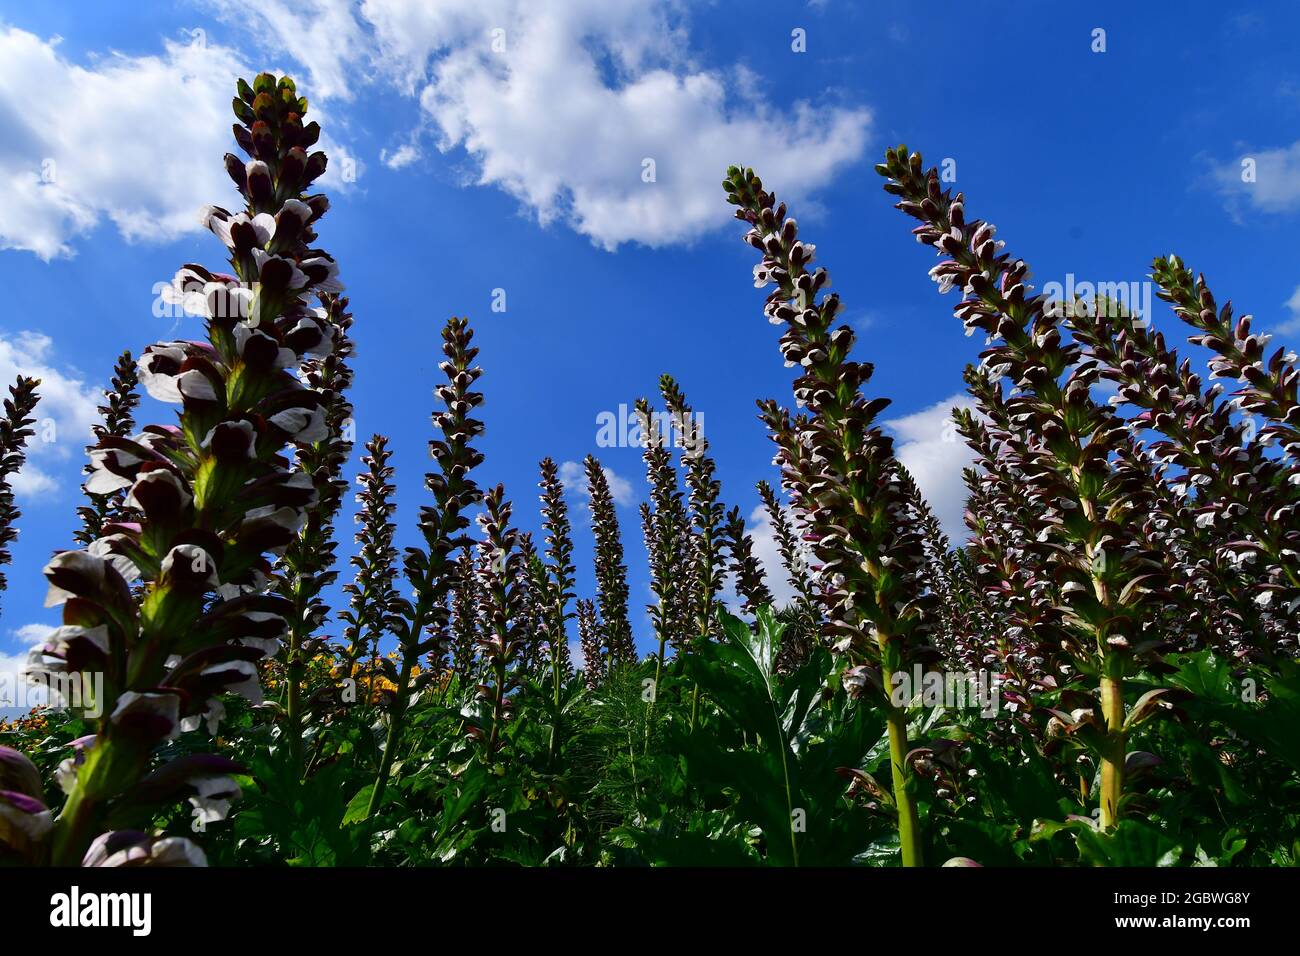 UK Lyme Regis on a dry and warm summers day pointing upwards to the blue sky with white fluffy clouds are seen a plant called Acanthus Mollis. Stock Photo